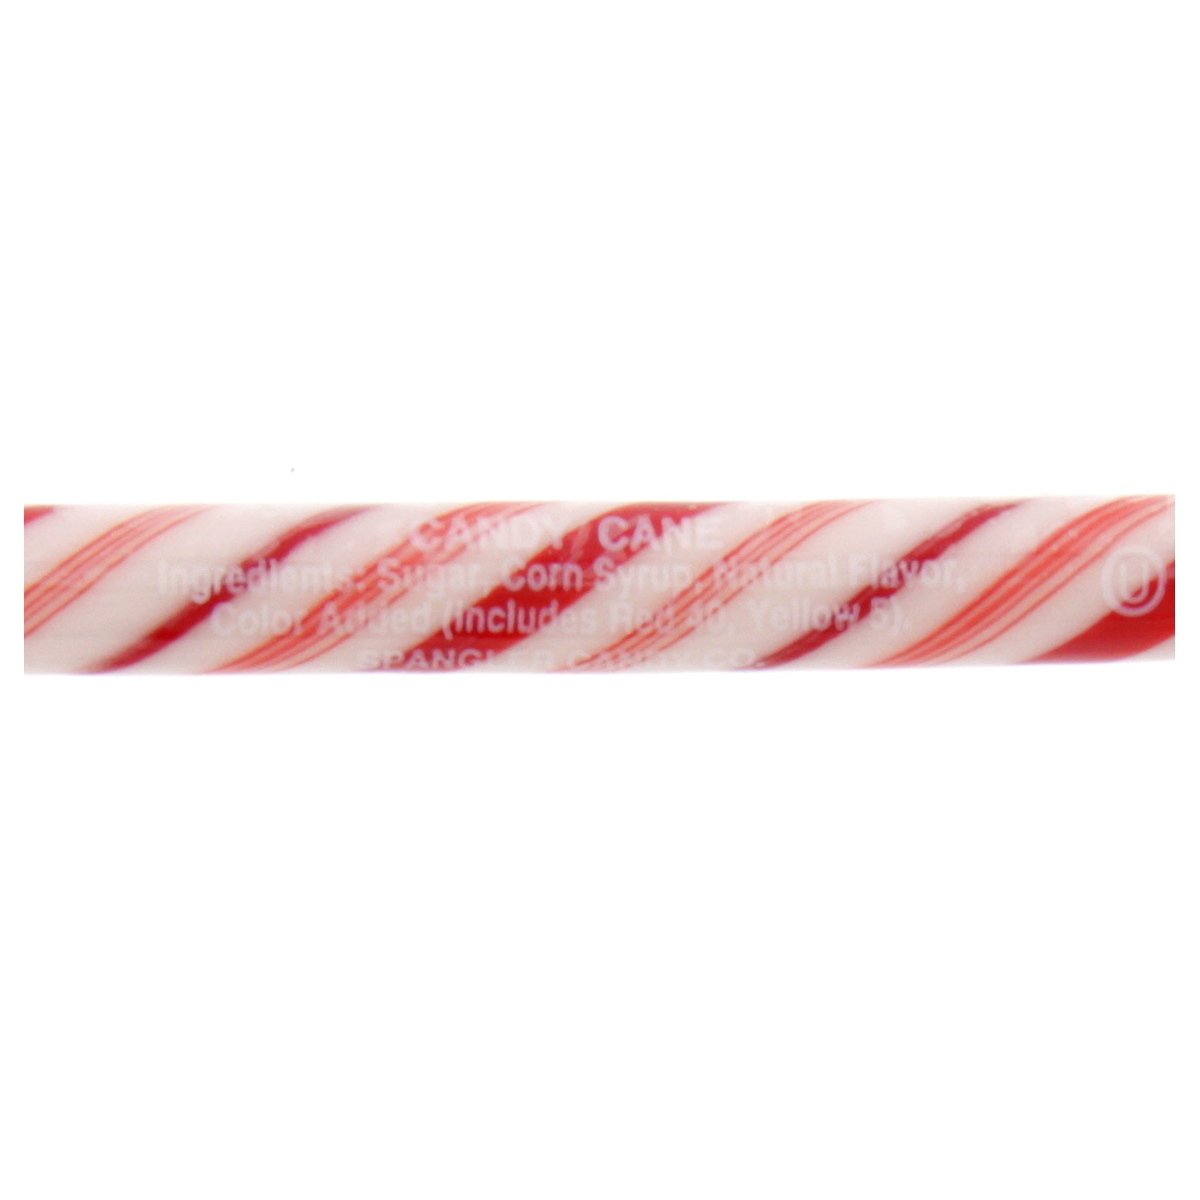 Spangler Red & White Candy Canes 1 pc